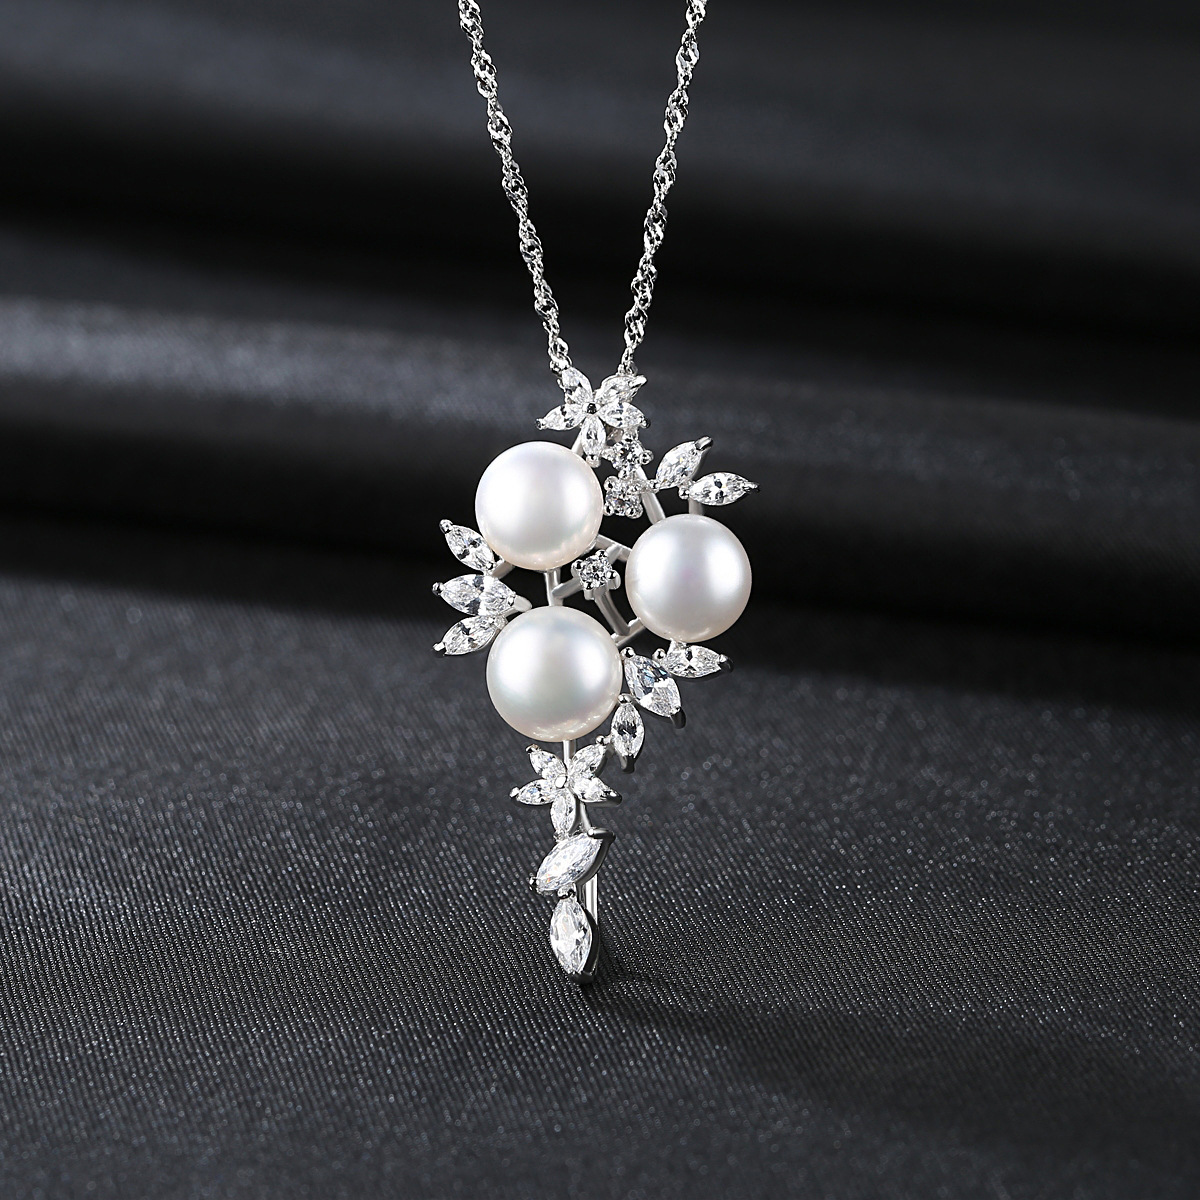 3a Cz Freshwater Pearl Pendant Sterling Silver Necklace